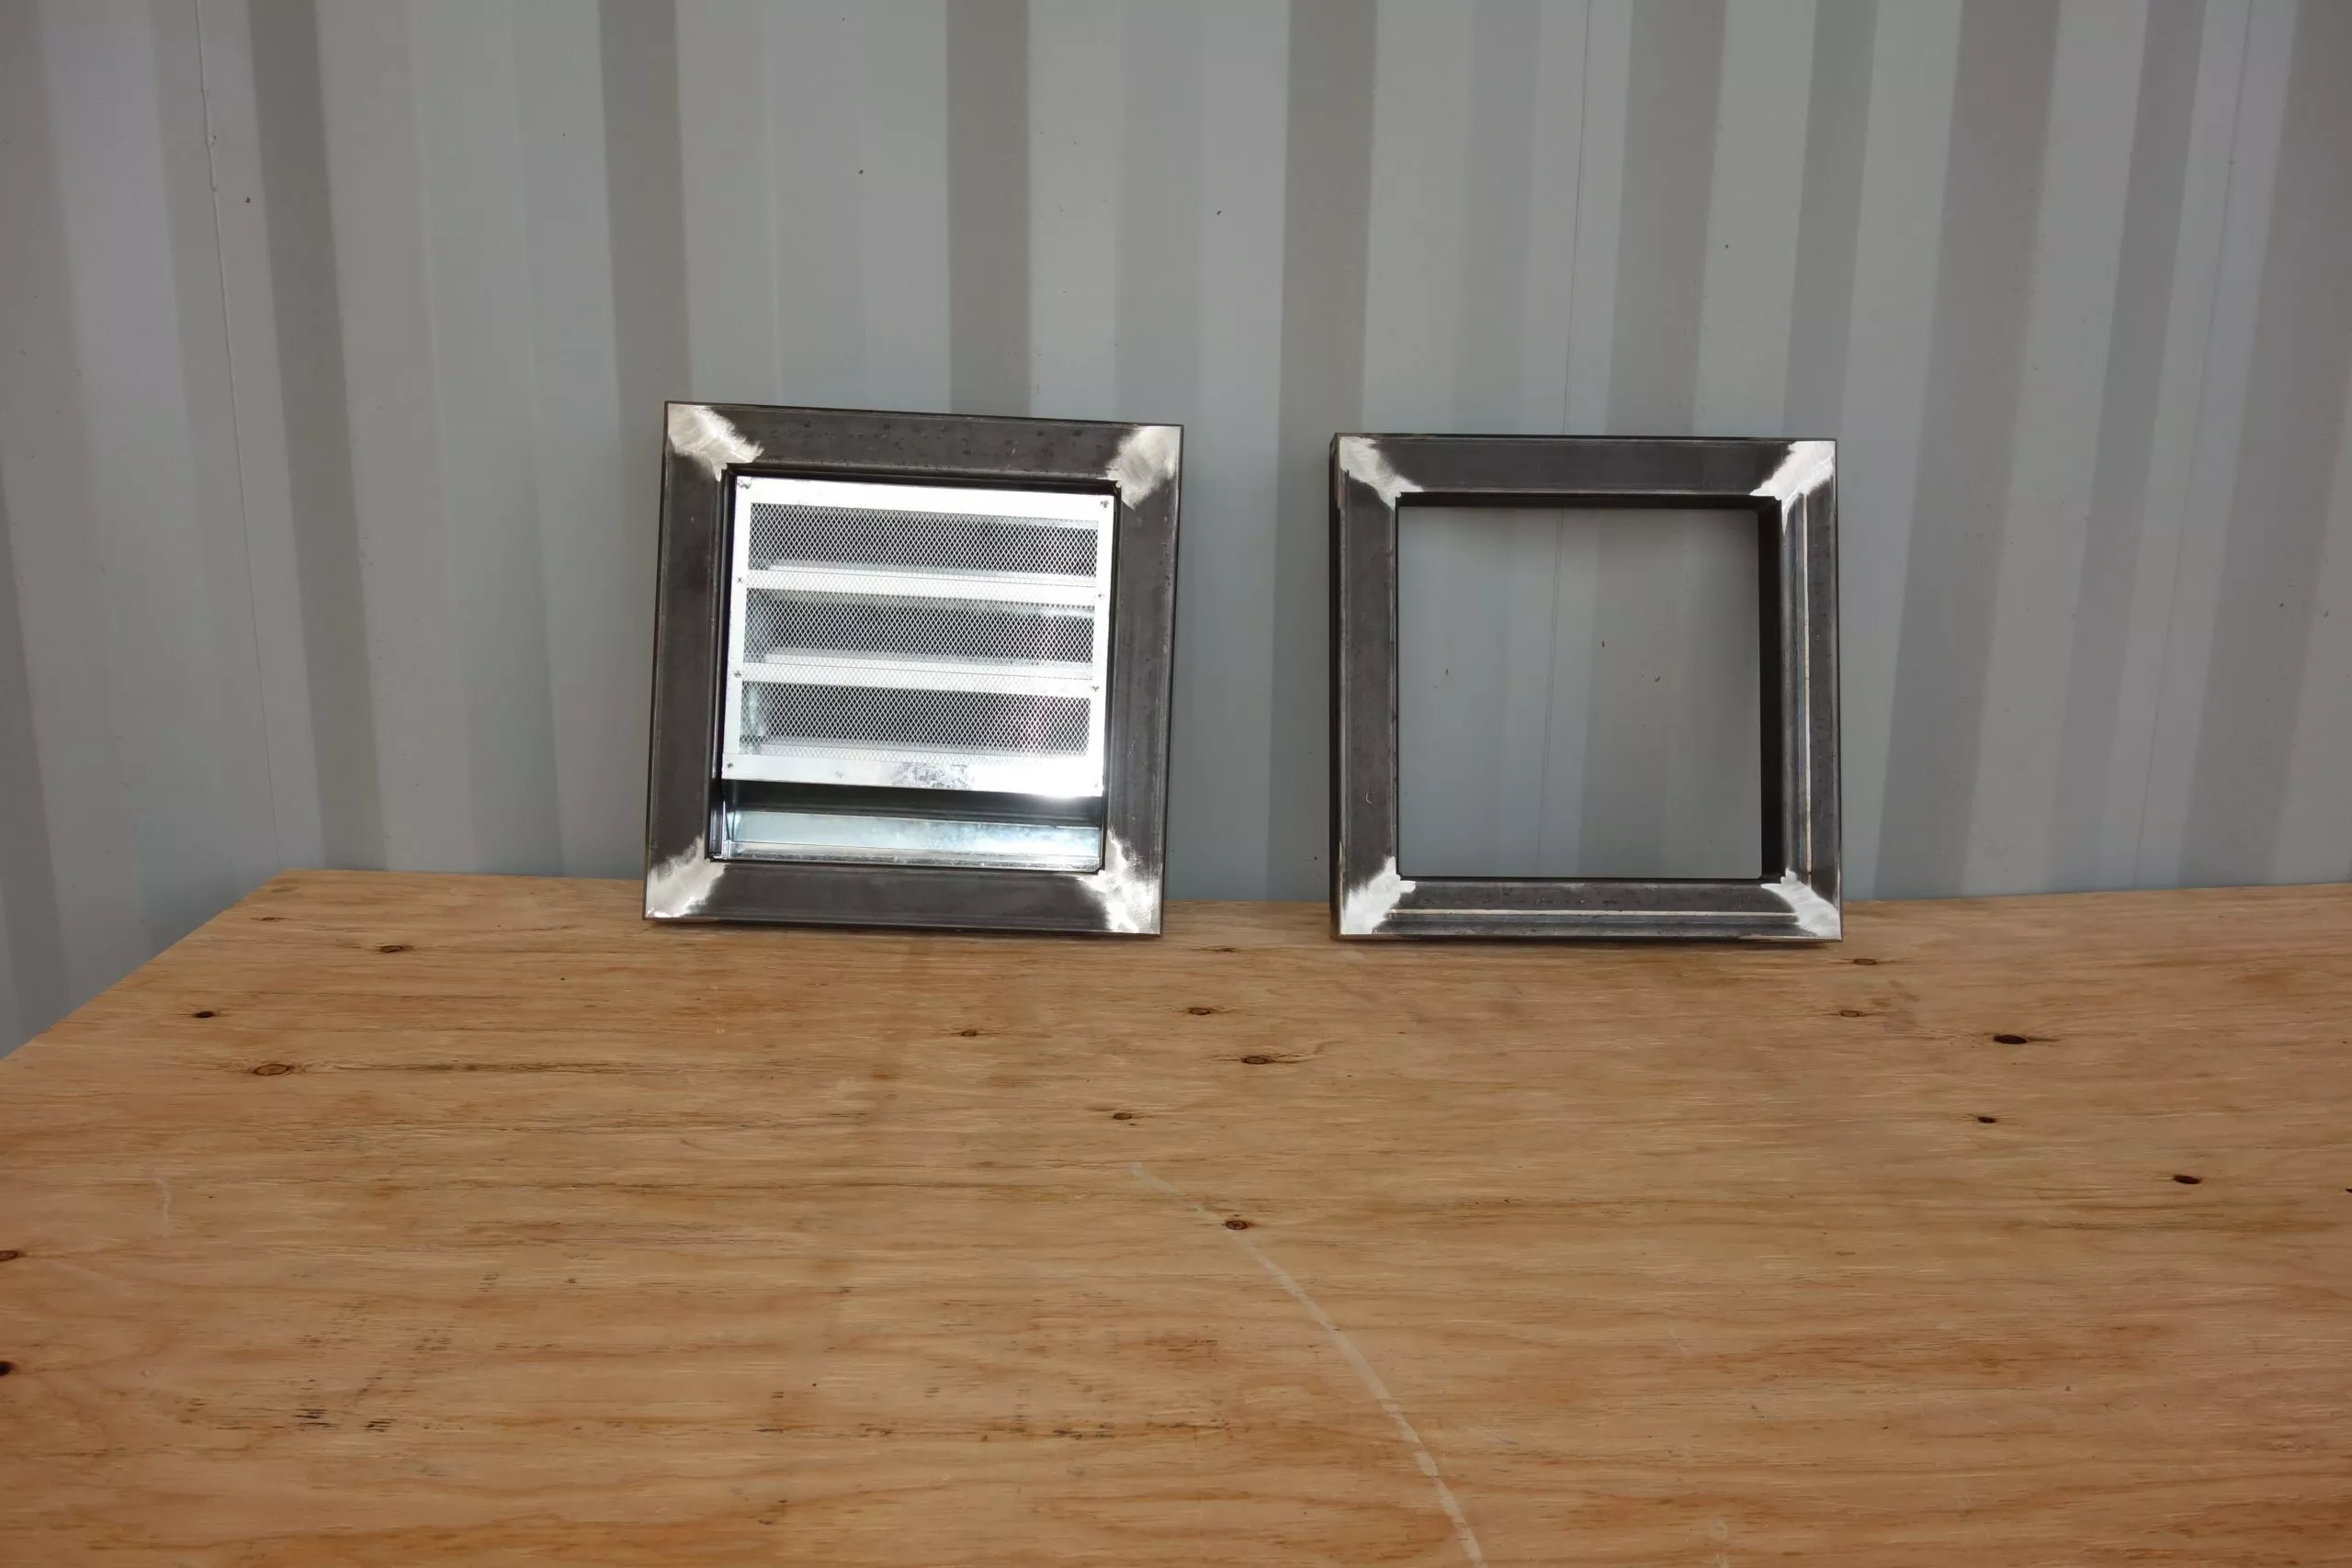 drybox window frame for shipping containers